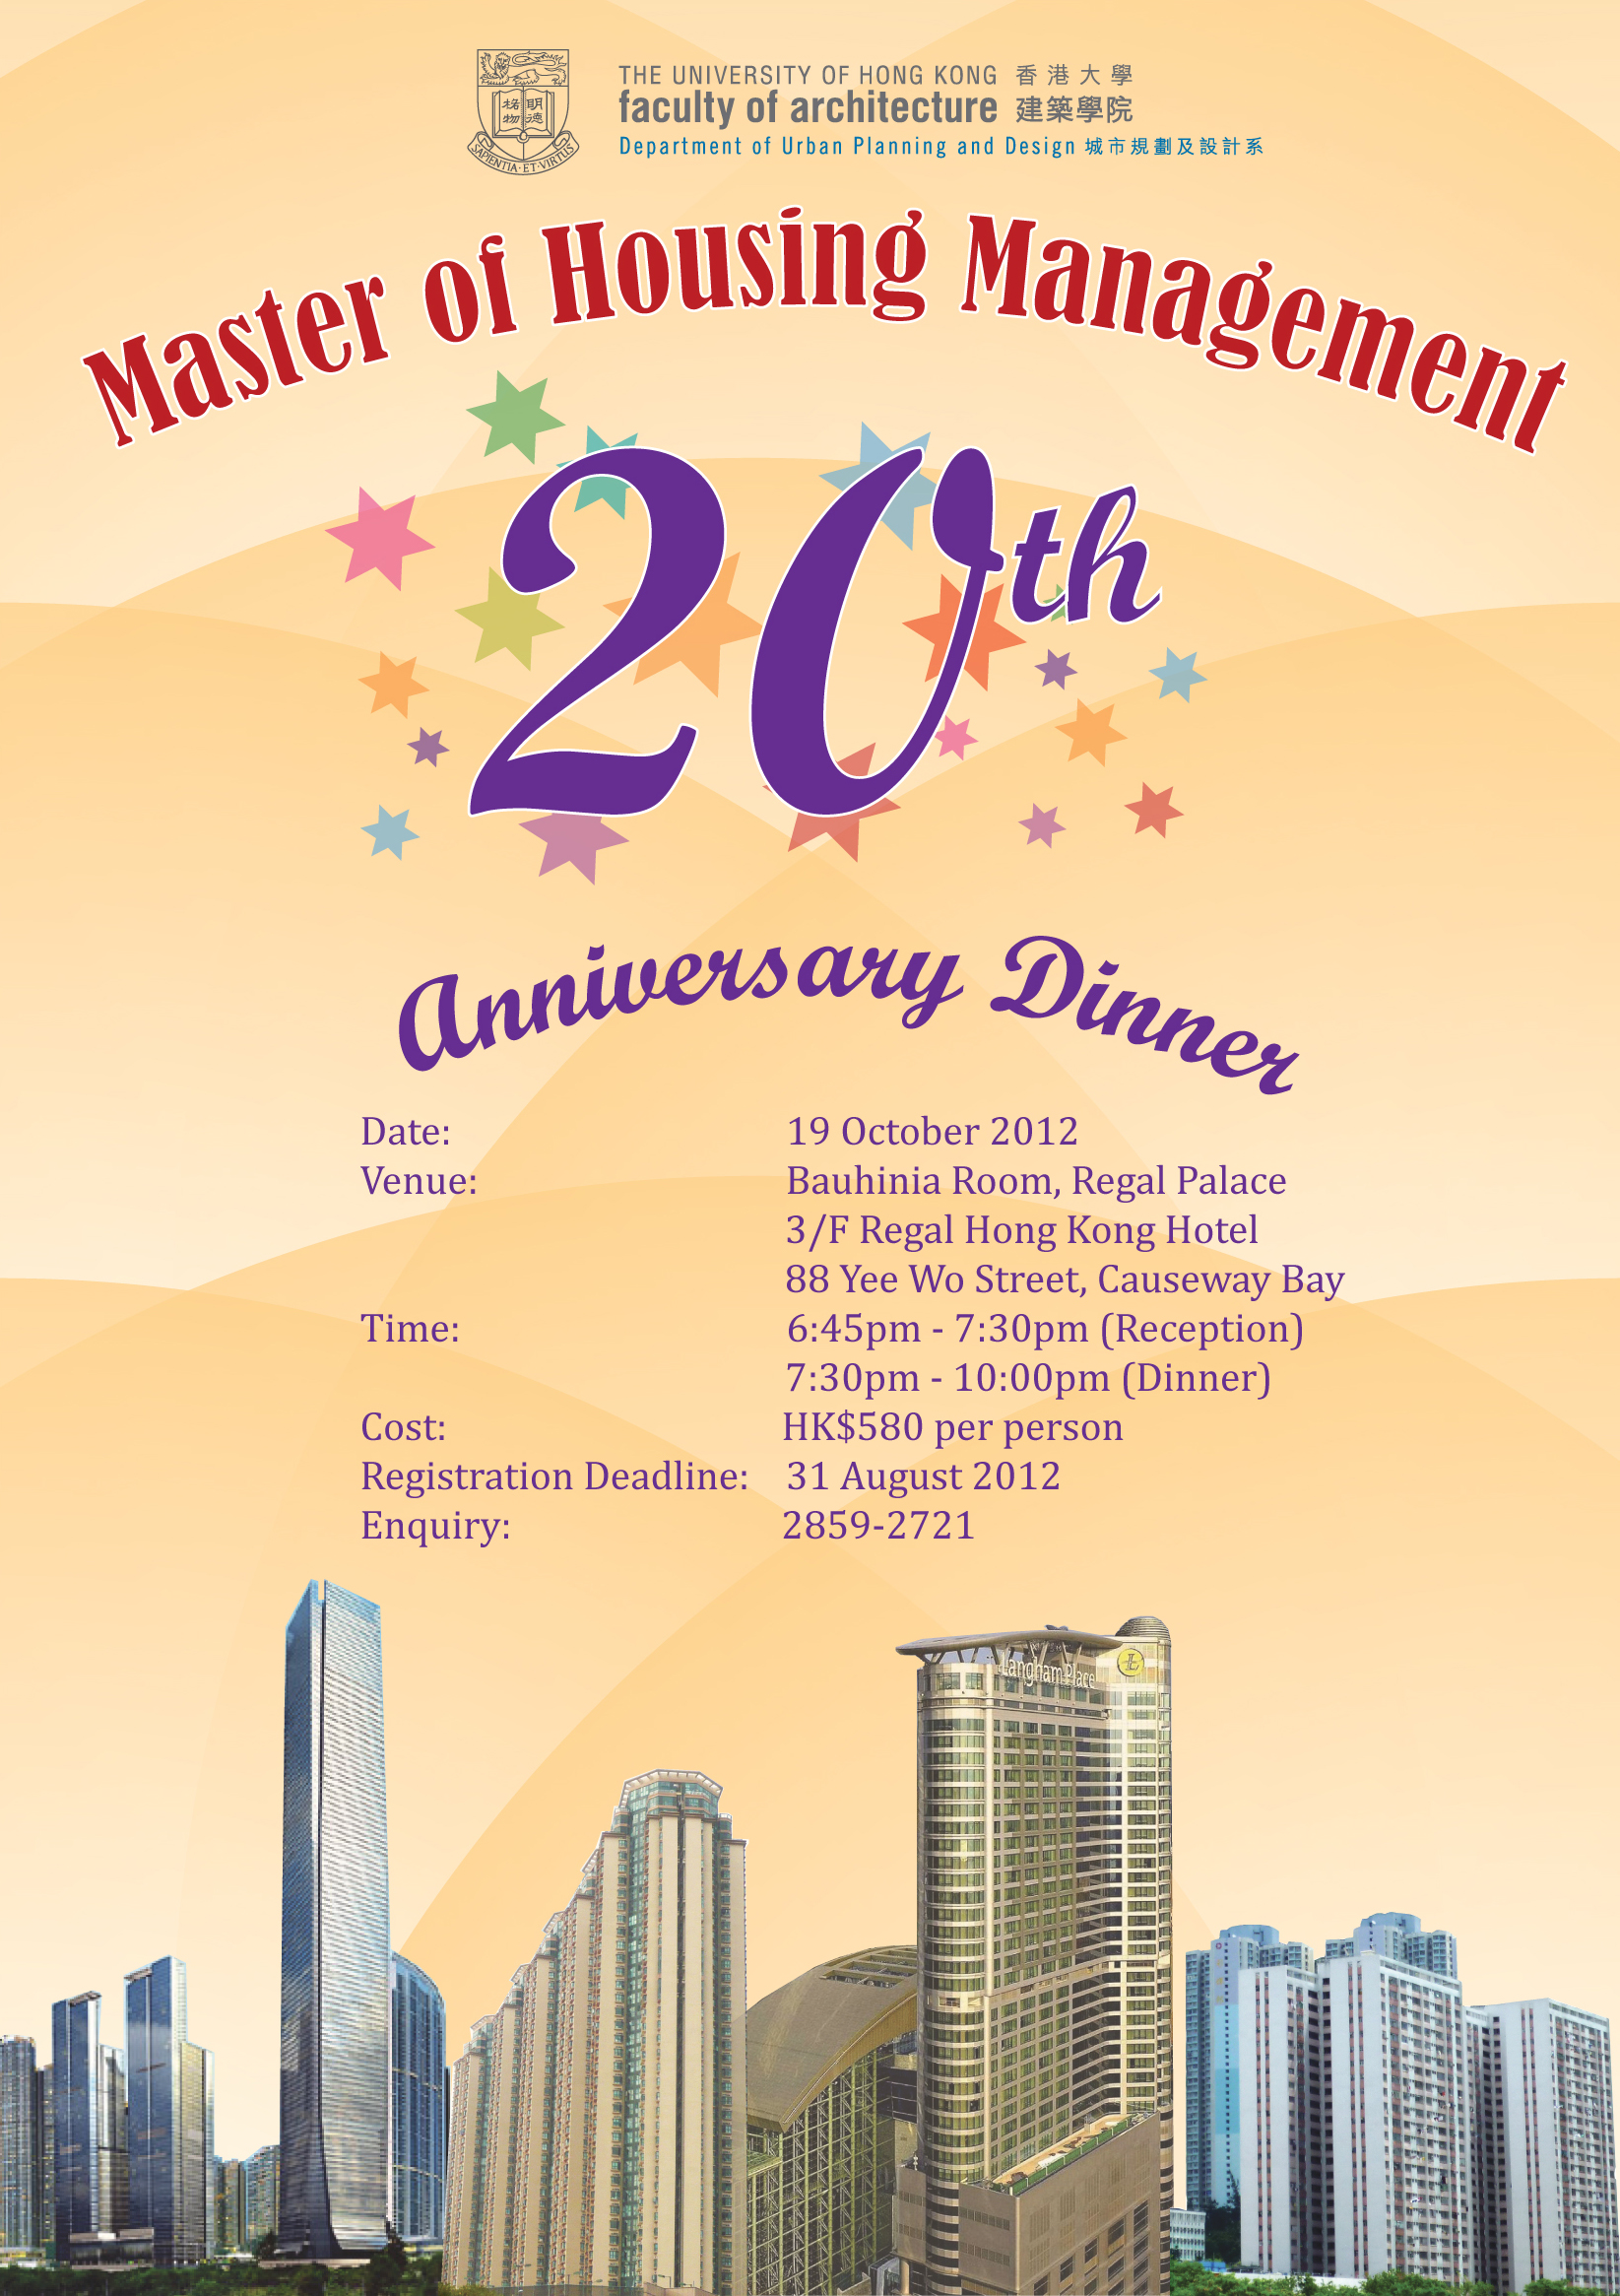 20th Anniversary Celebration of the Master of Housing Management